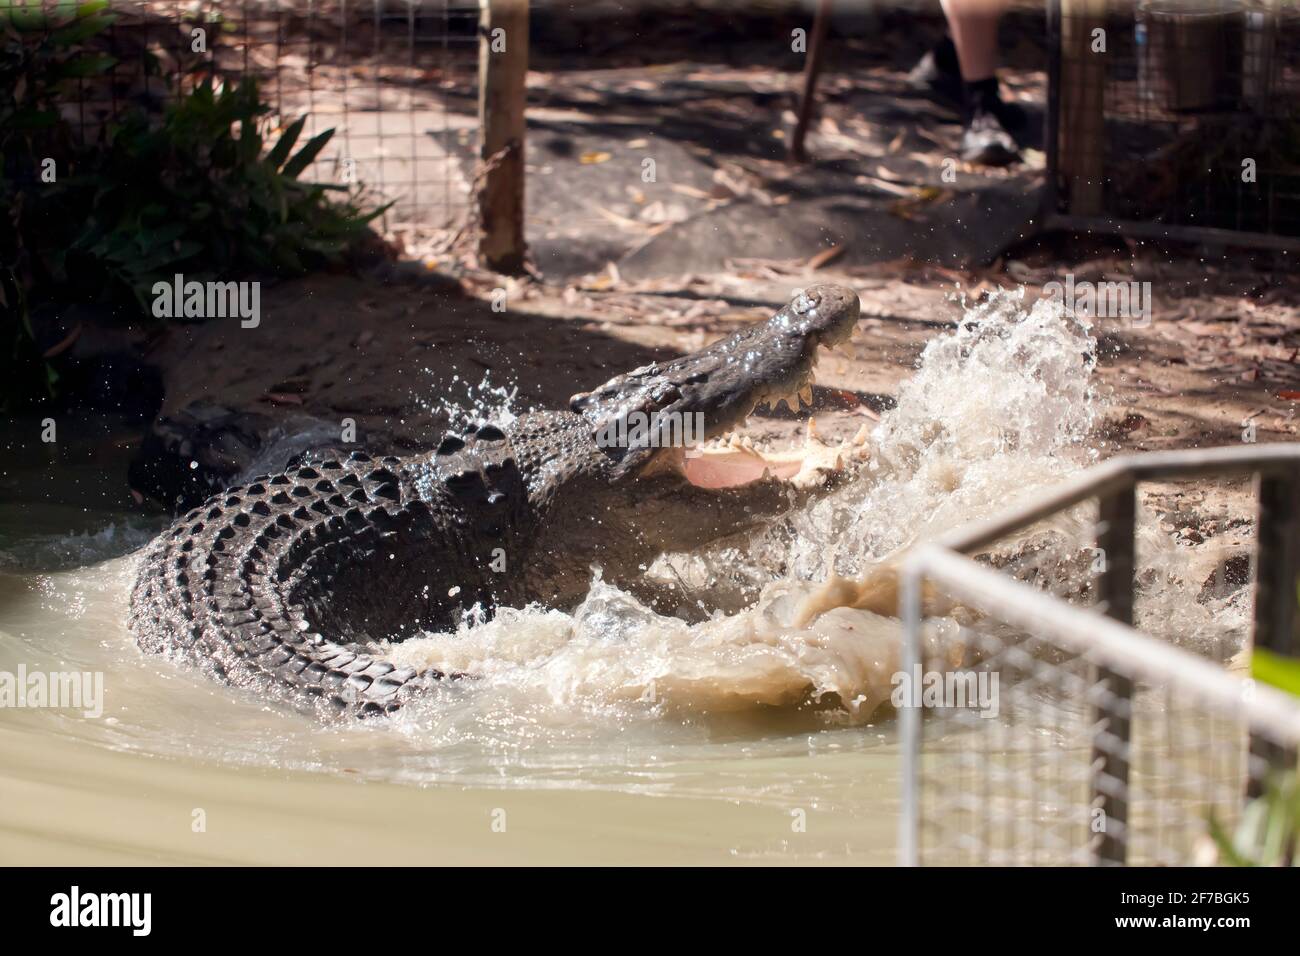 A large Crocodile  being fed by hand, at Hartley's Crocodile Adventures, Captain Cook Highway, Wangetti, Queensland, Australia. Stock Photo